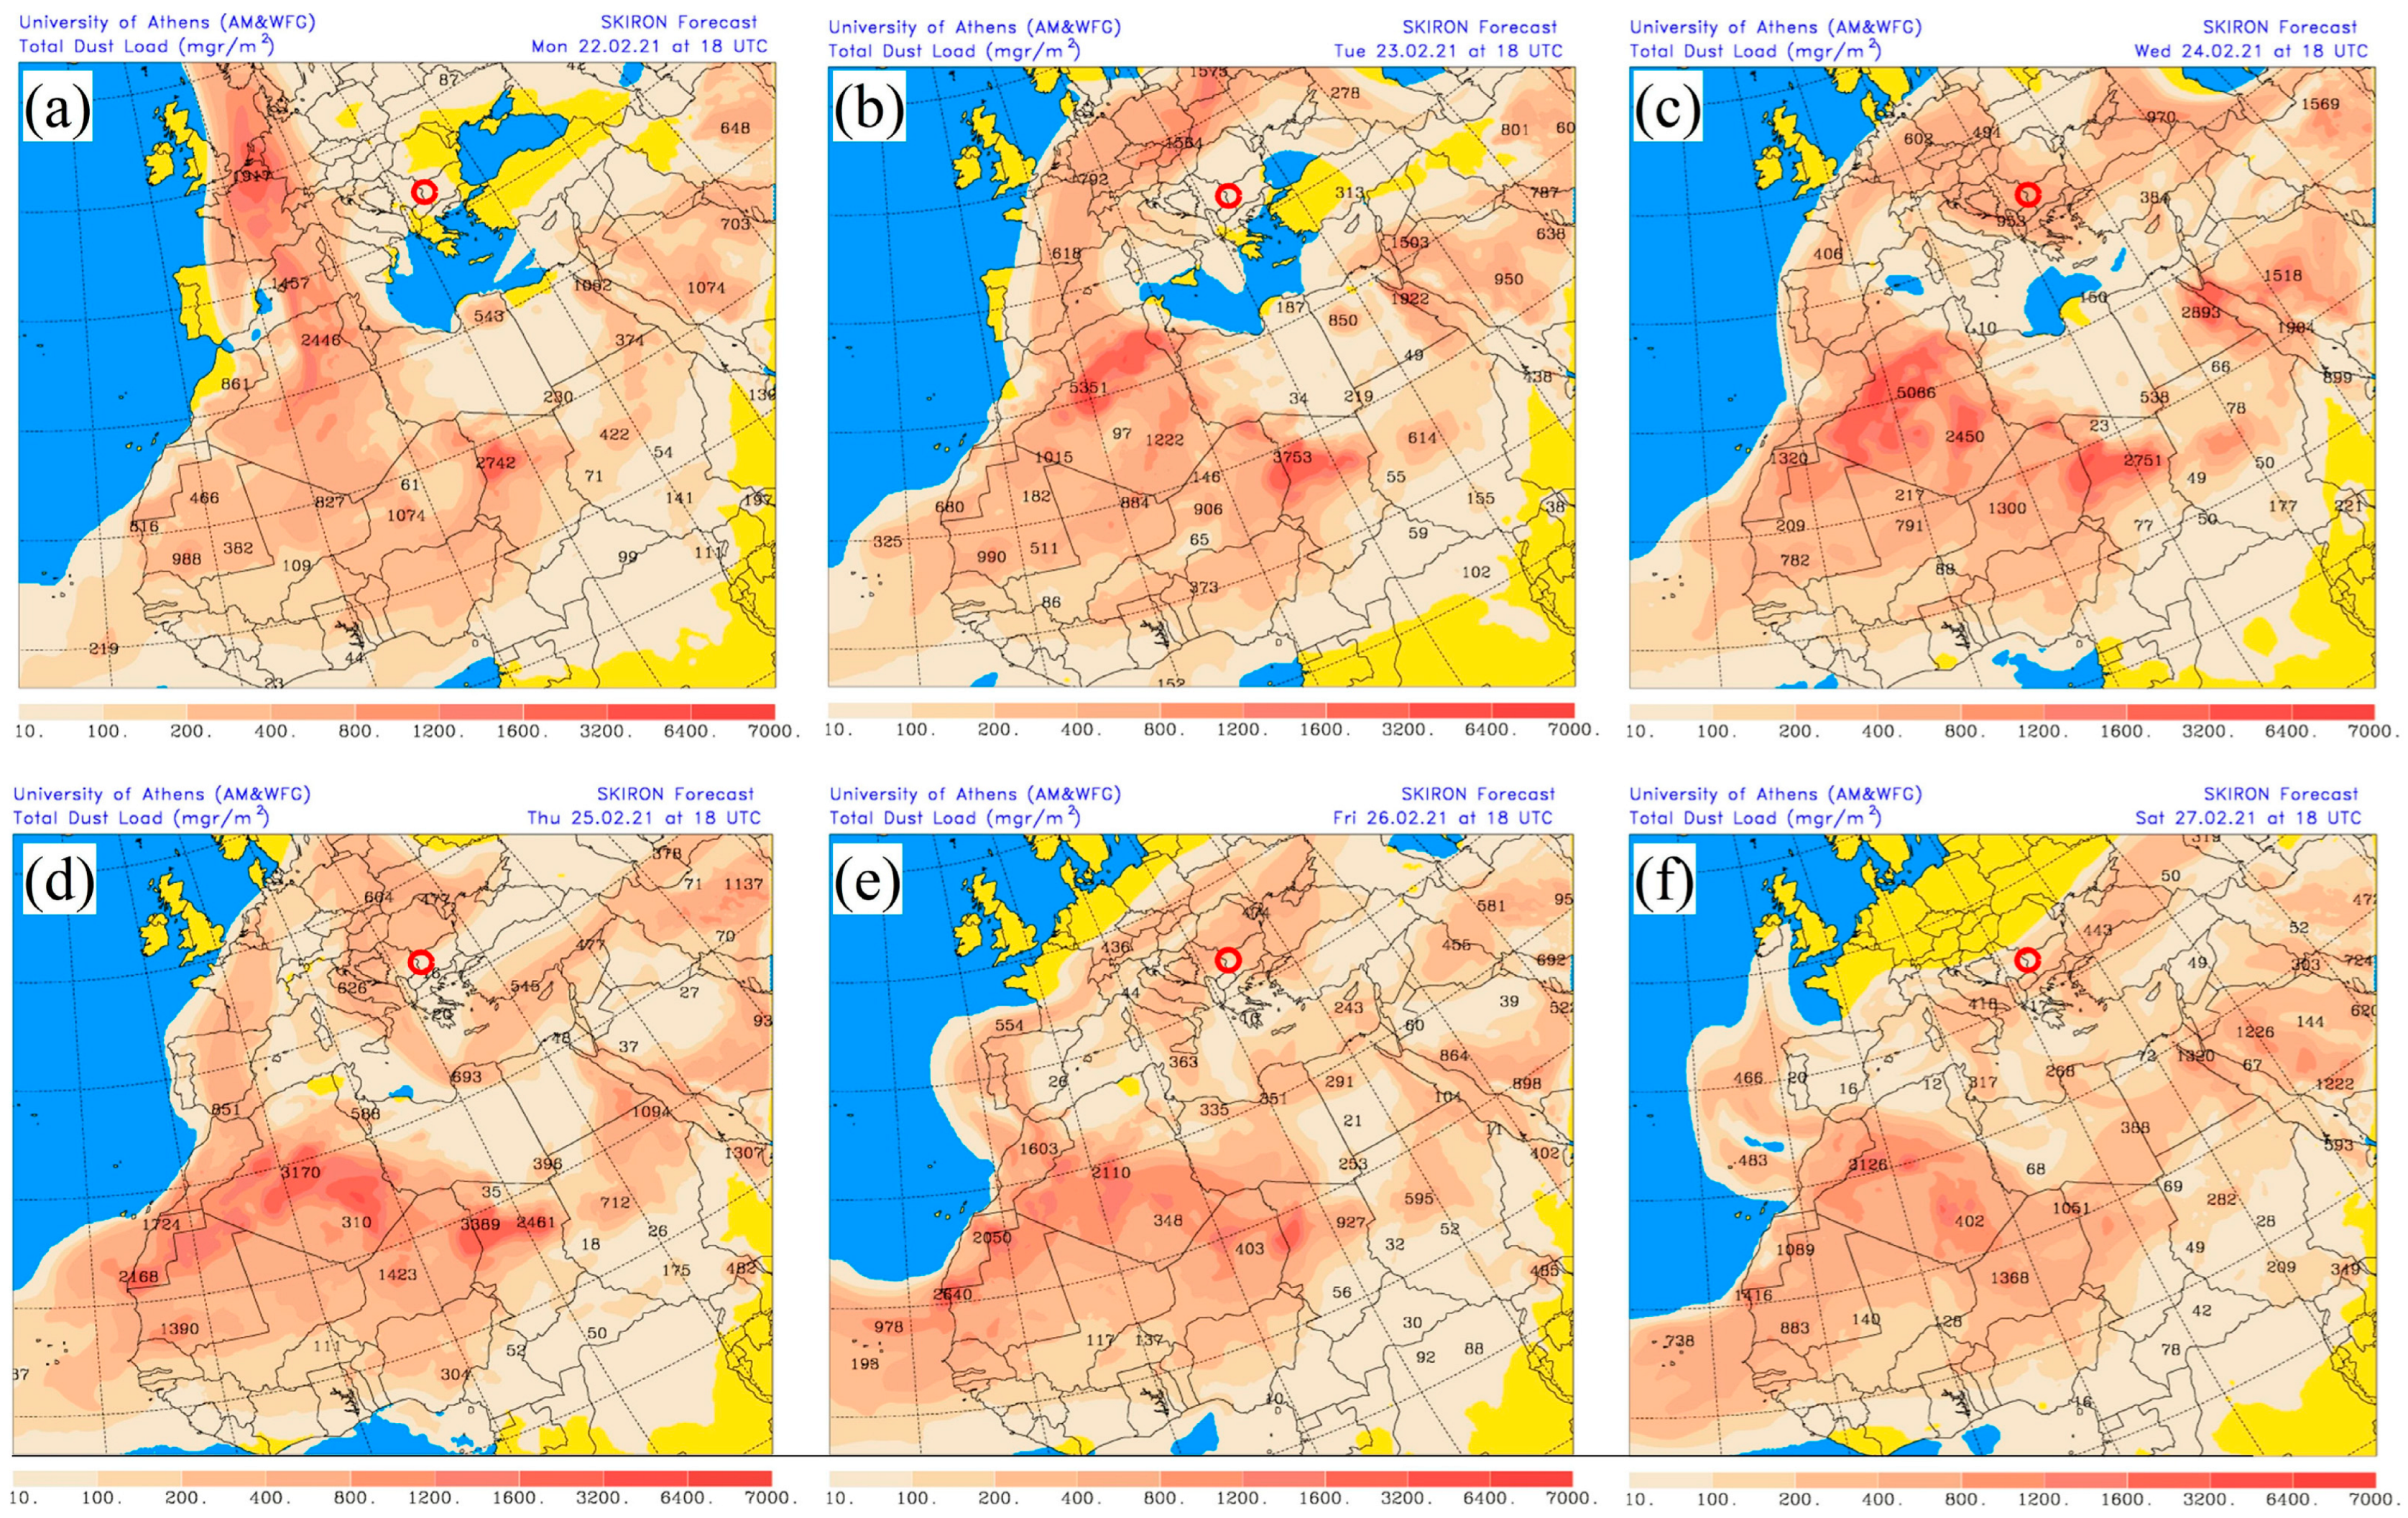 ACP - Relations - Comparison of dust optical depth from multi-sensor  products and MONARCH (Multiscale Online Non-hydrostatic AtmospheRe  CHemistry) dust reanalysis over North Africa, the Middle East, and Europe